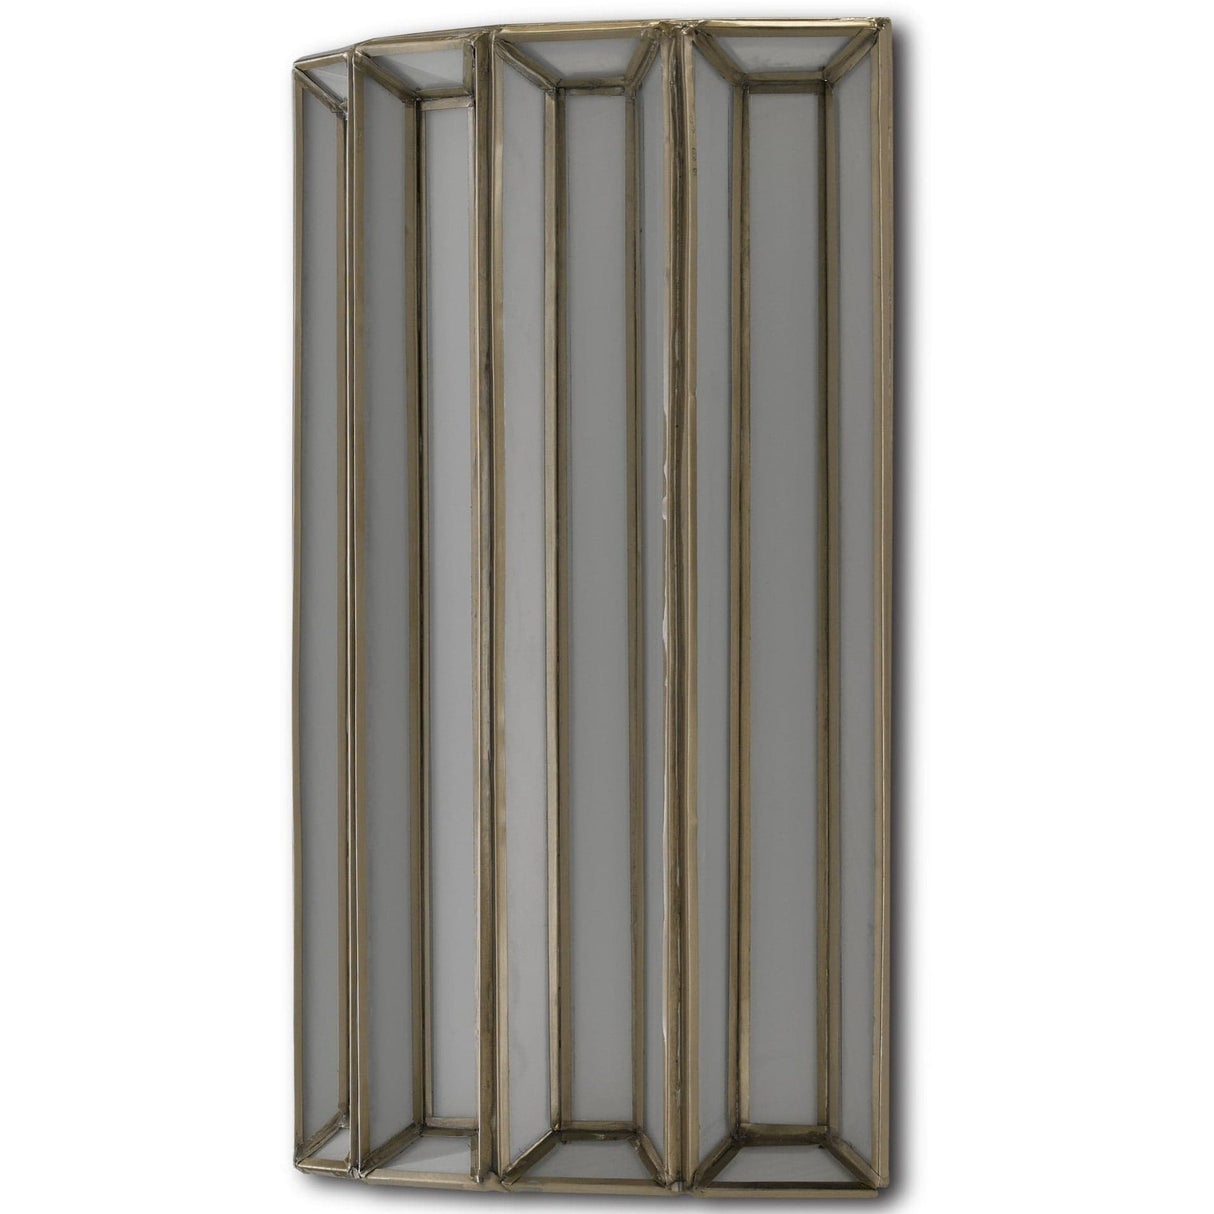 Currey & Company Daze Wall Sconce Wall Sconces currey-co-5000-0175 633306035010